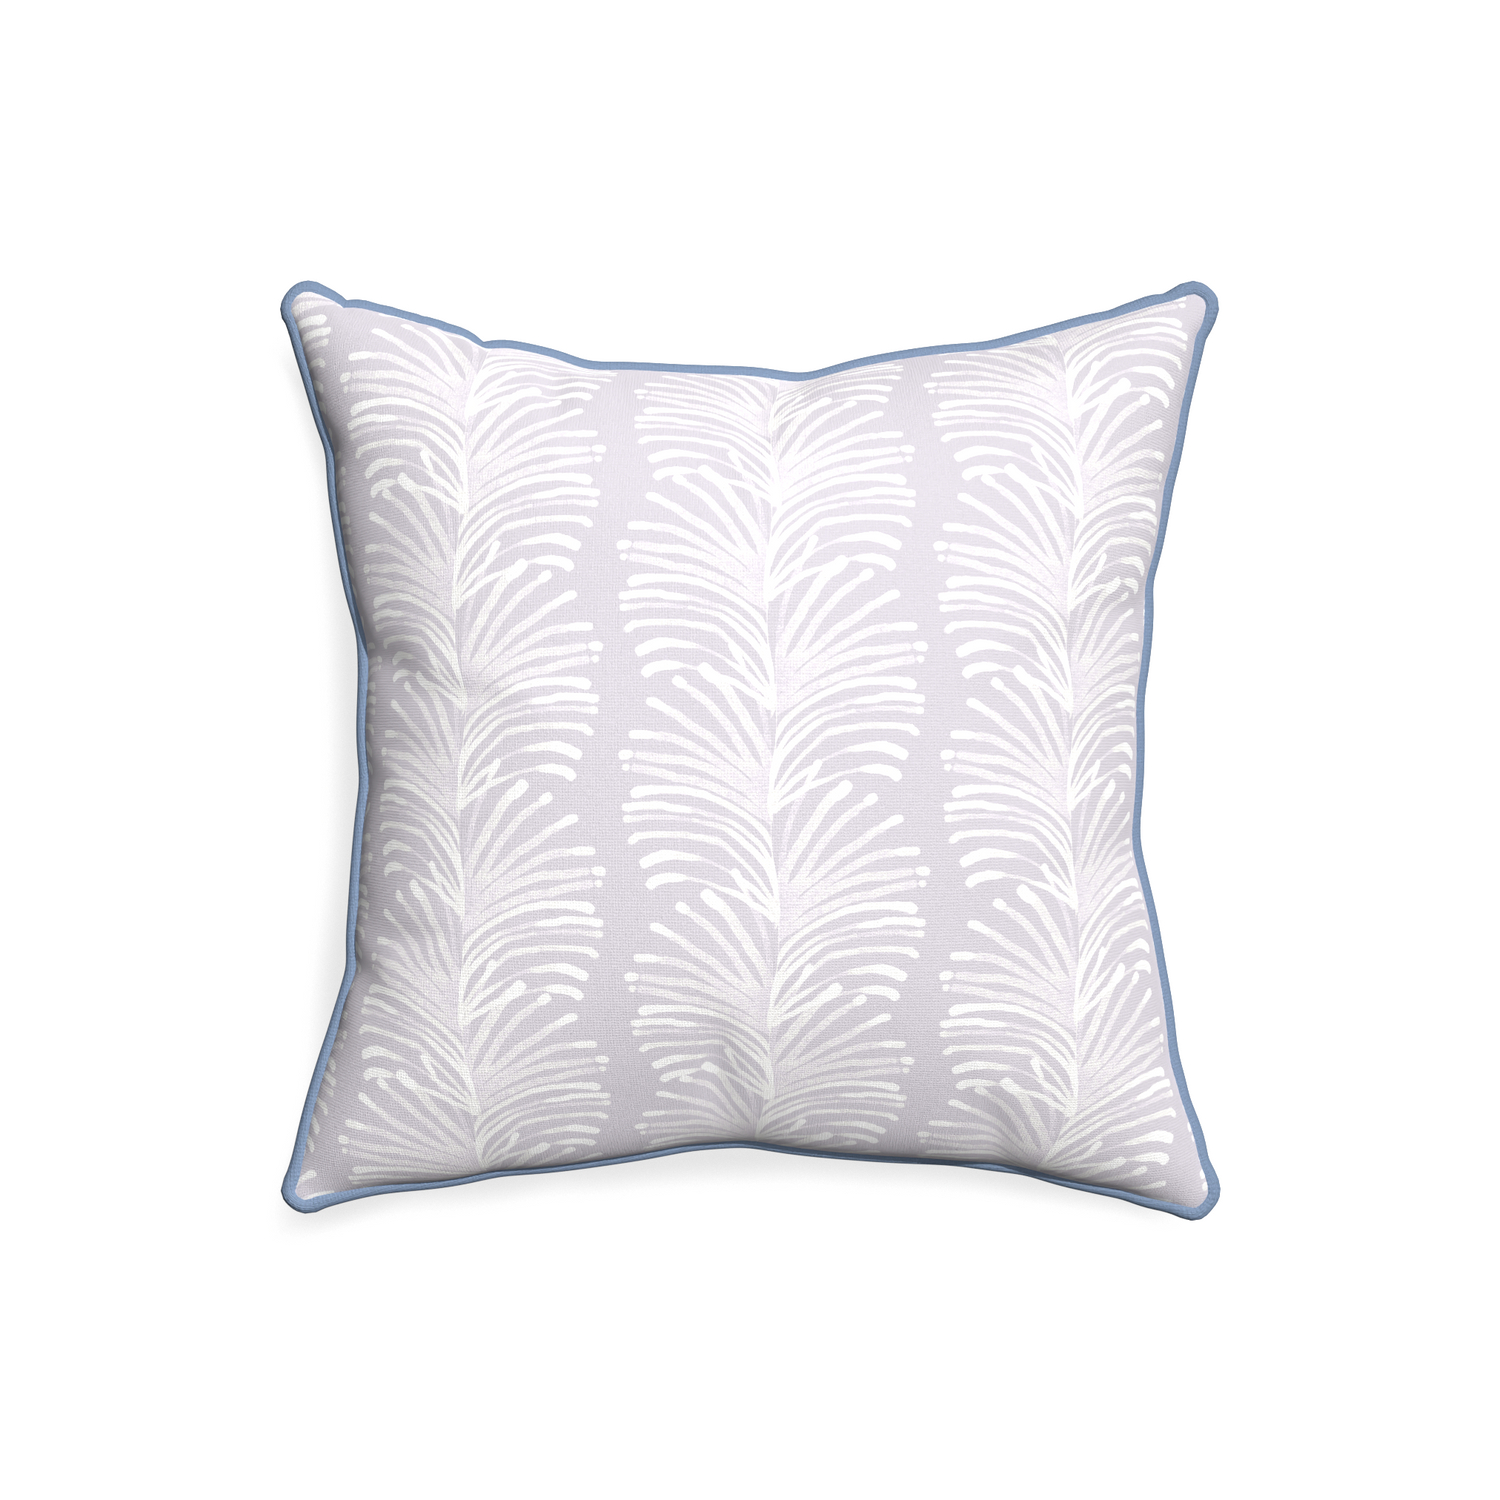 20-square emma lavender custom pillow with sky piping on white background